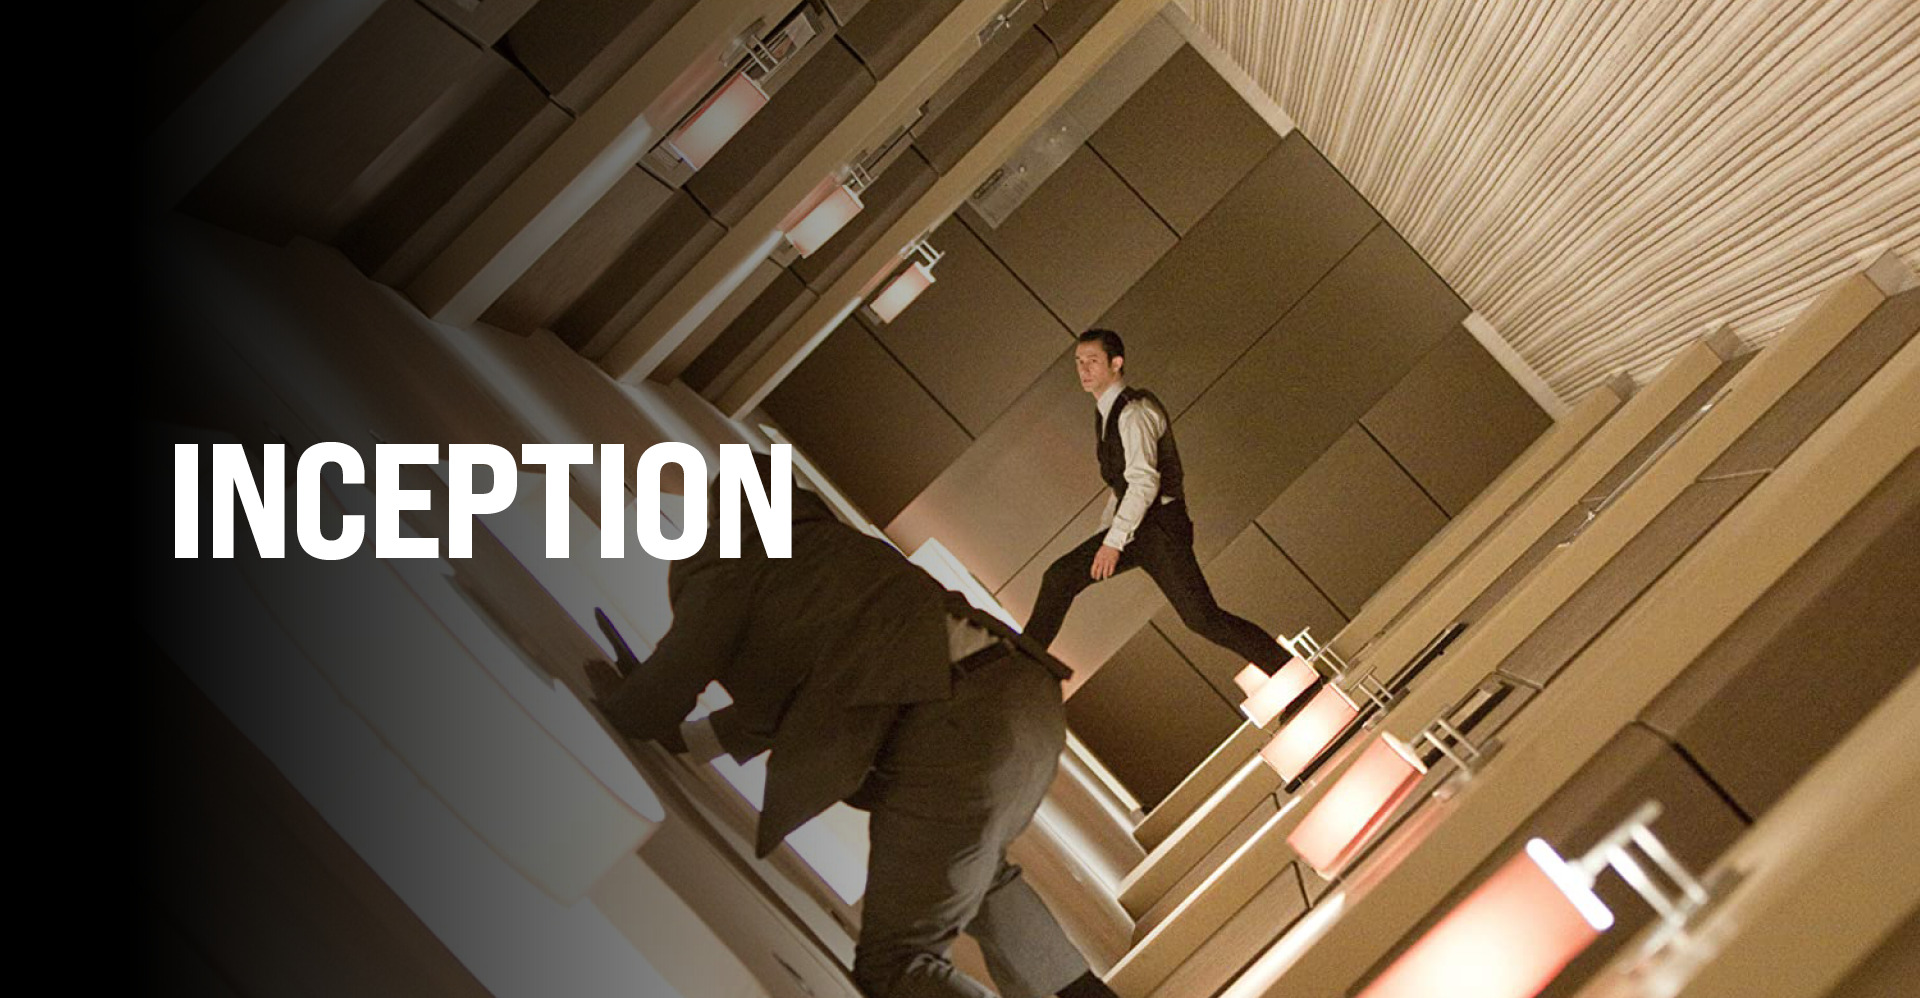 46-facts-about-the-movie-inception